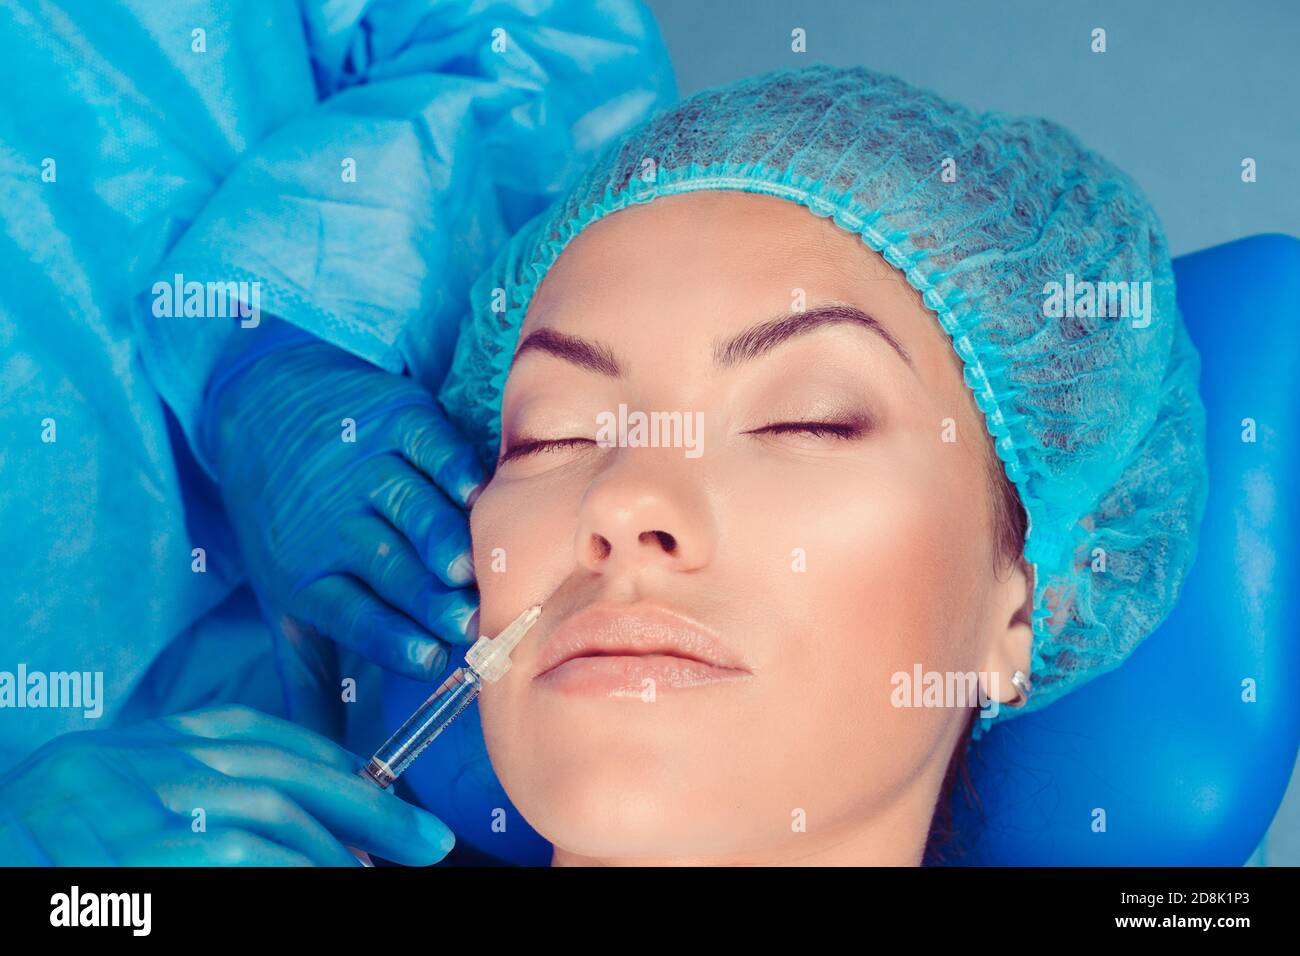 Hyaluronic acid injection for facial rejuvenation procedure in nasolabial fold wrinkle. Patient receiving cosmetic therapy in a clinic surgery room; O Stock Photo